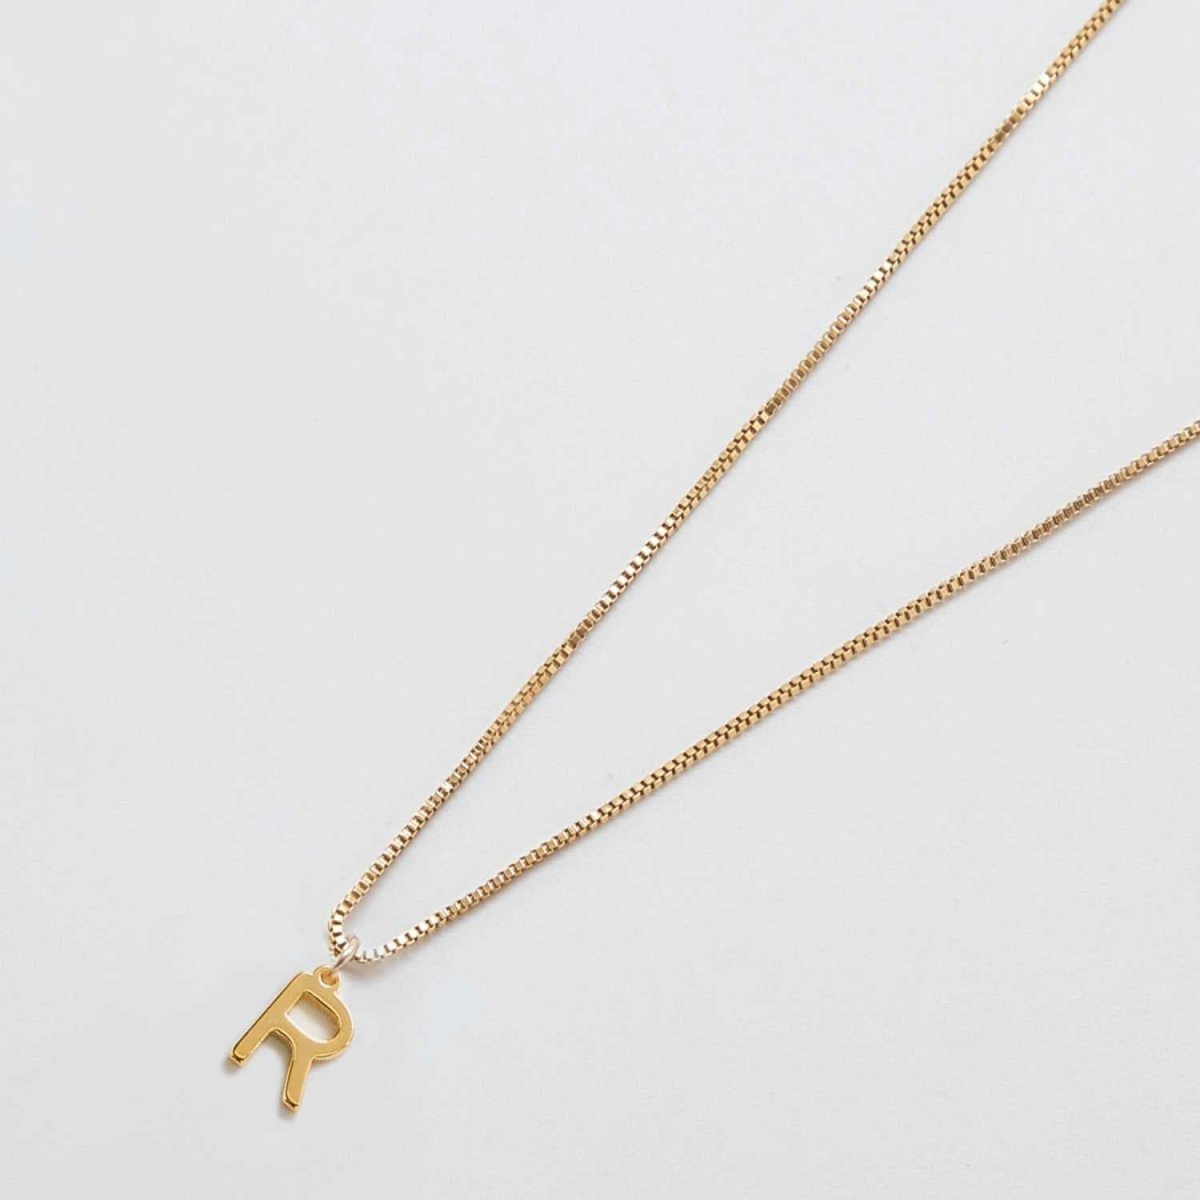 Shop 18ct Solid Gold and Diamond Luxury Initial Necklaces — Annoushka UK